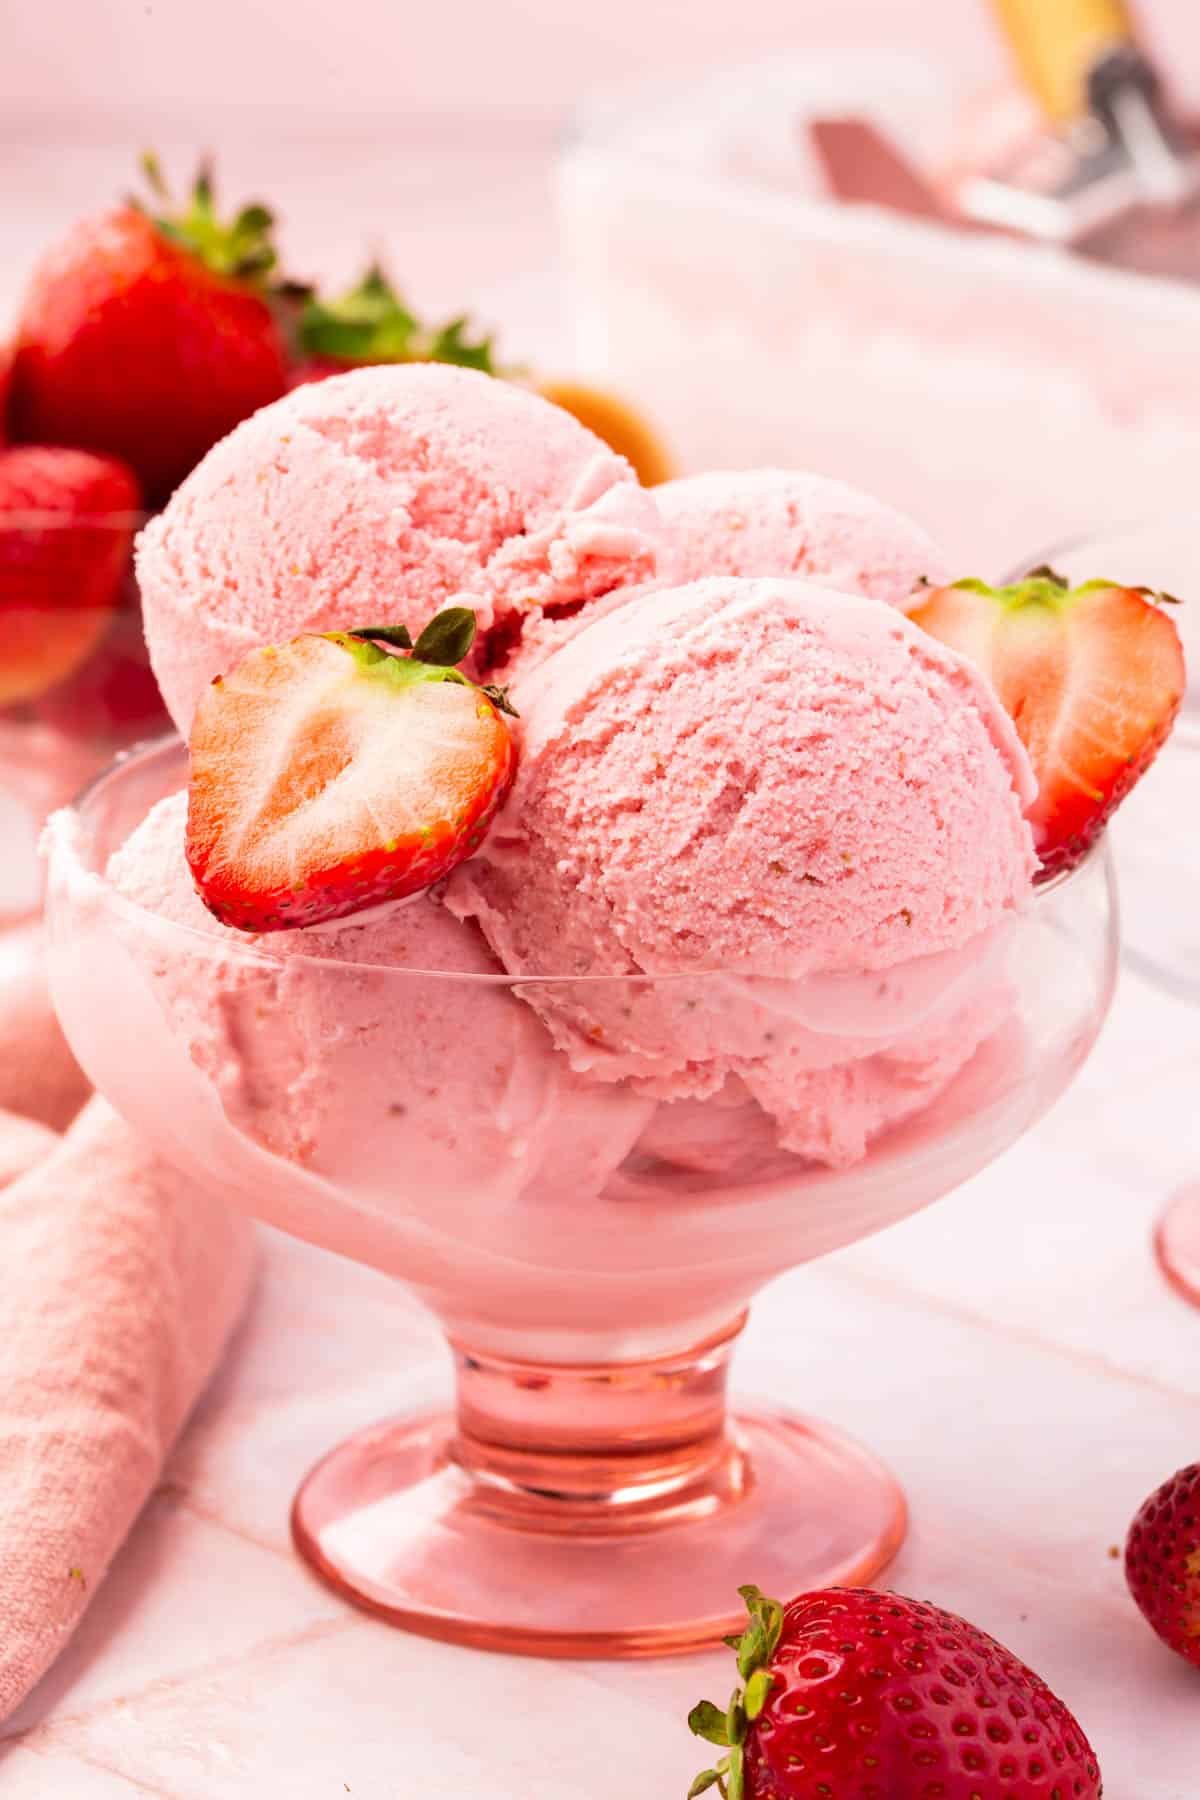 A pink footed bowl with scoops of strawberry ice cream topped with strawberry halves.